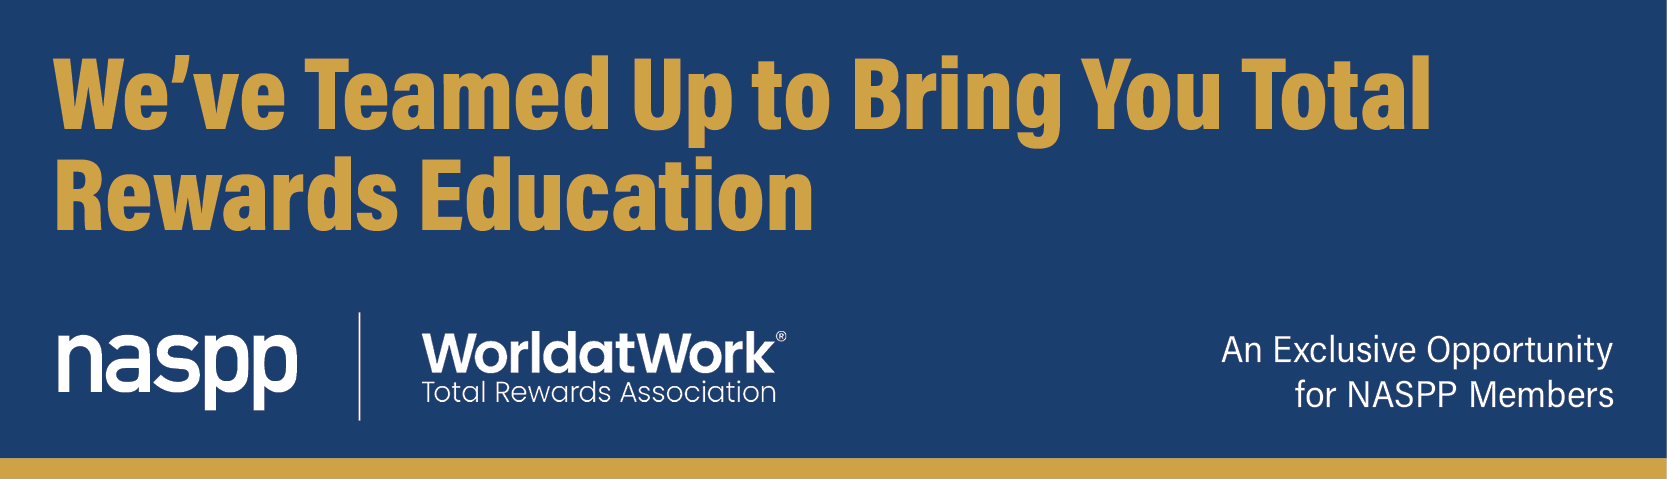 We've Teamed Up to Bring You Total Rewards Education, NASPP and WorldatWork